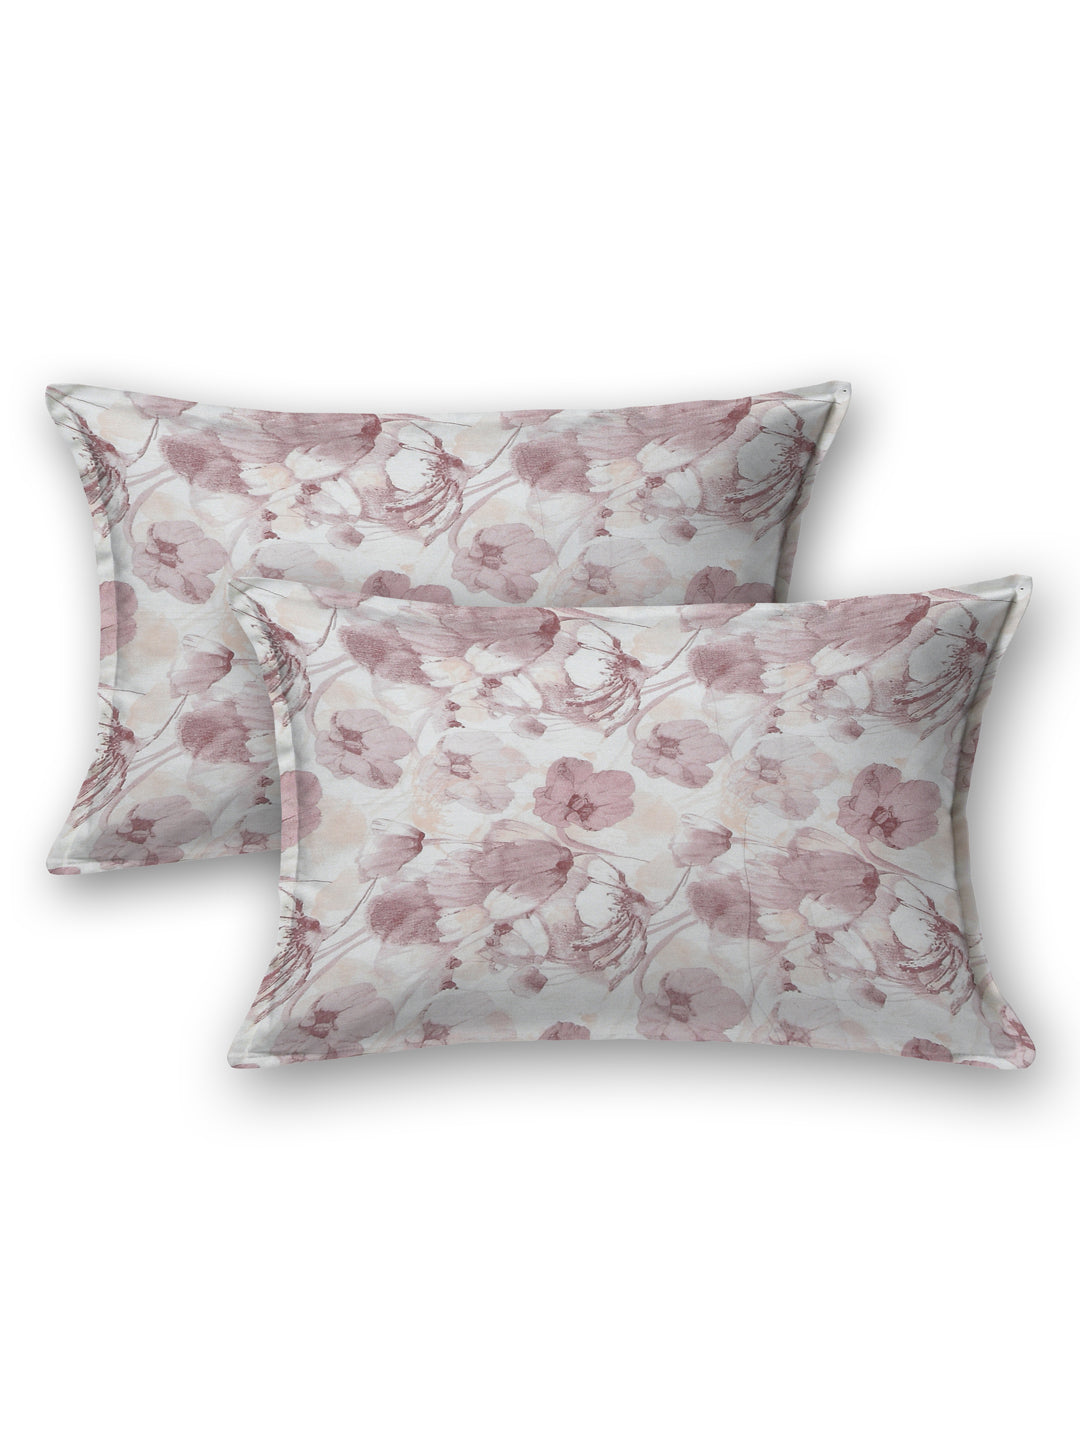 Pink & Peach Floral King Size Bed Cotton Linen